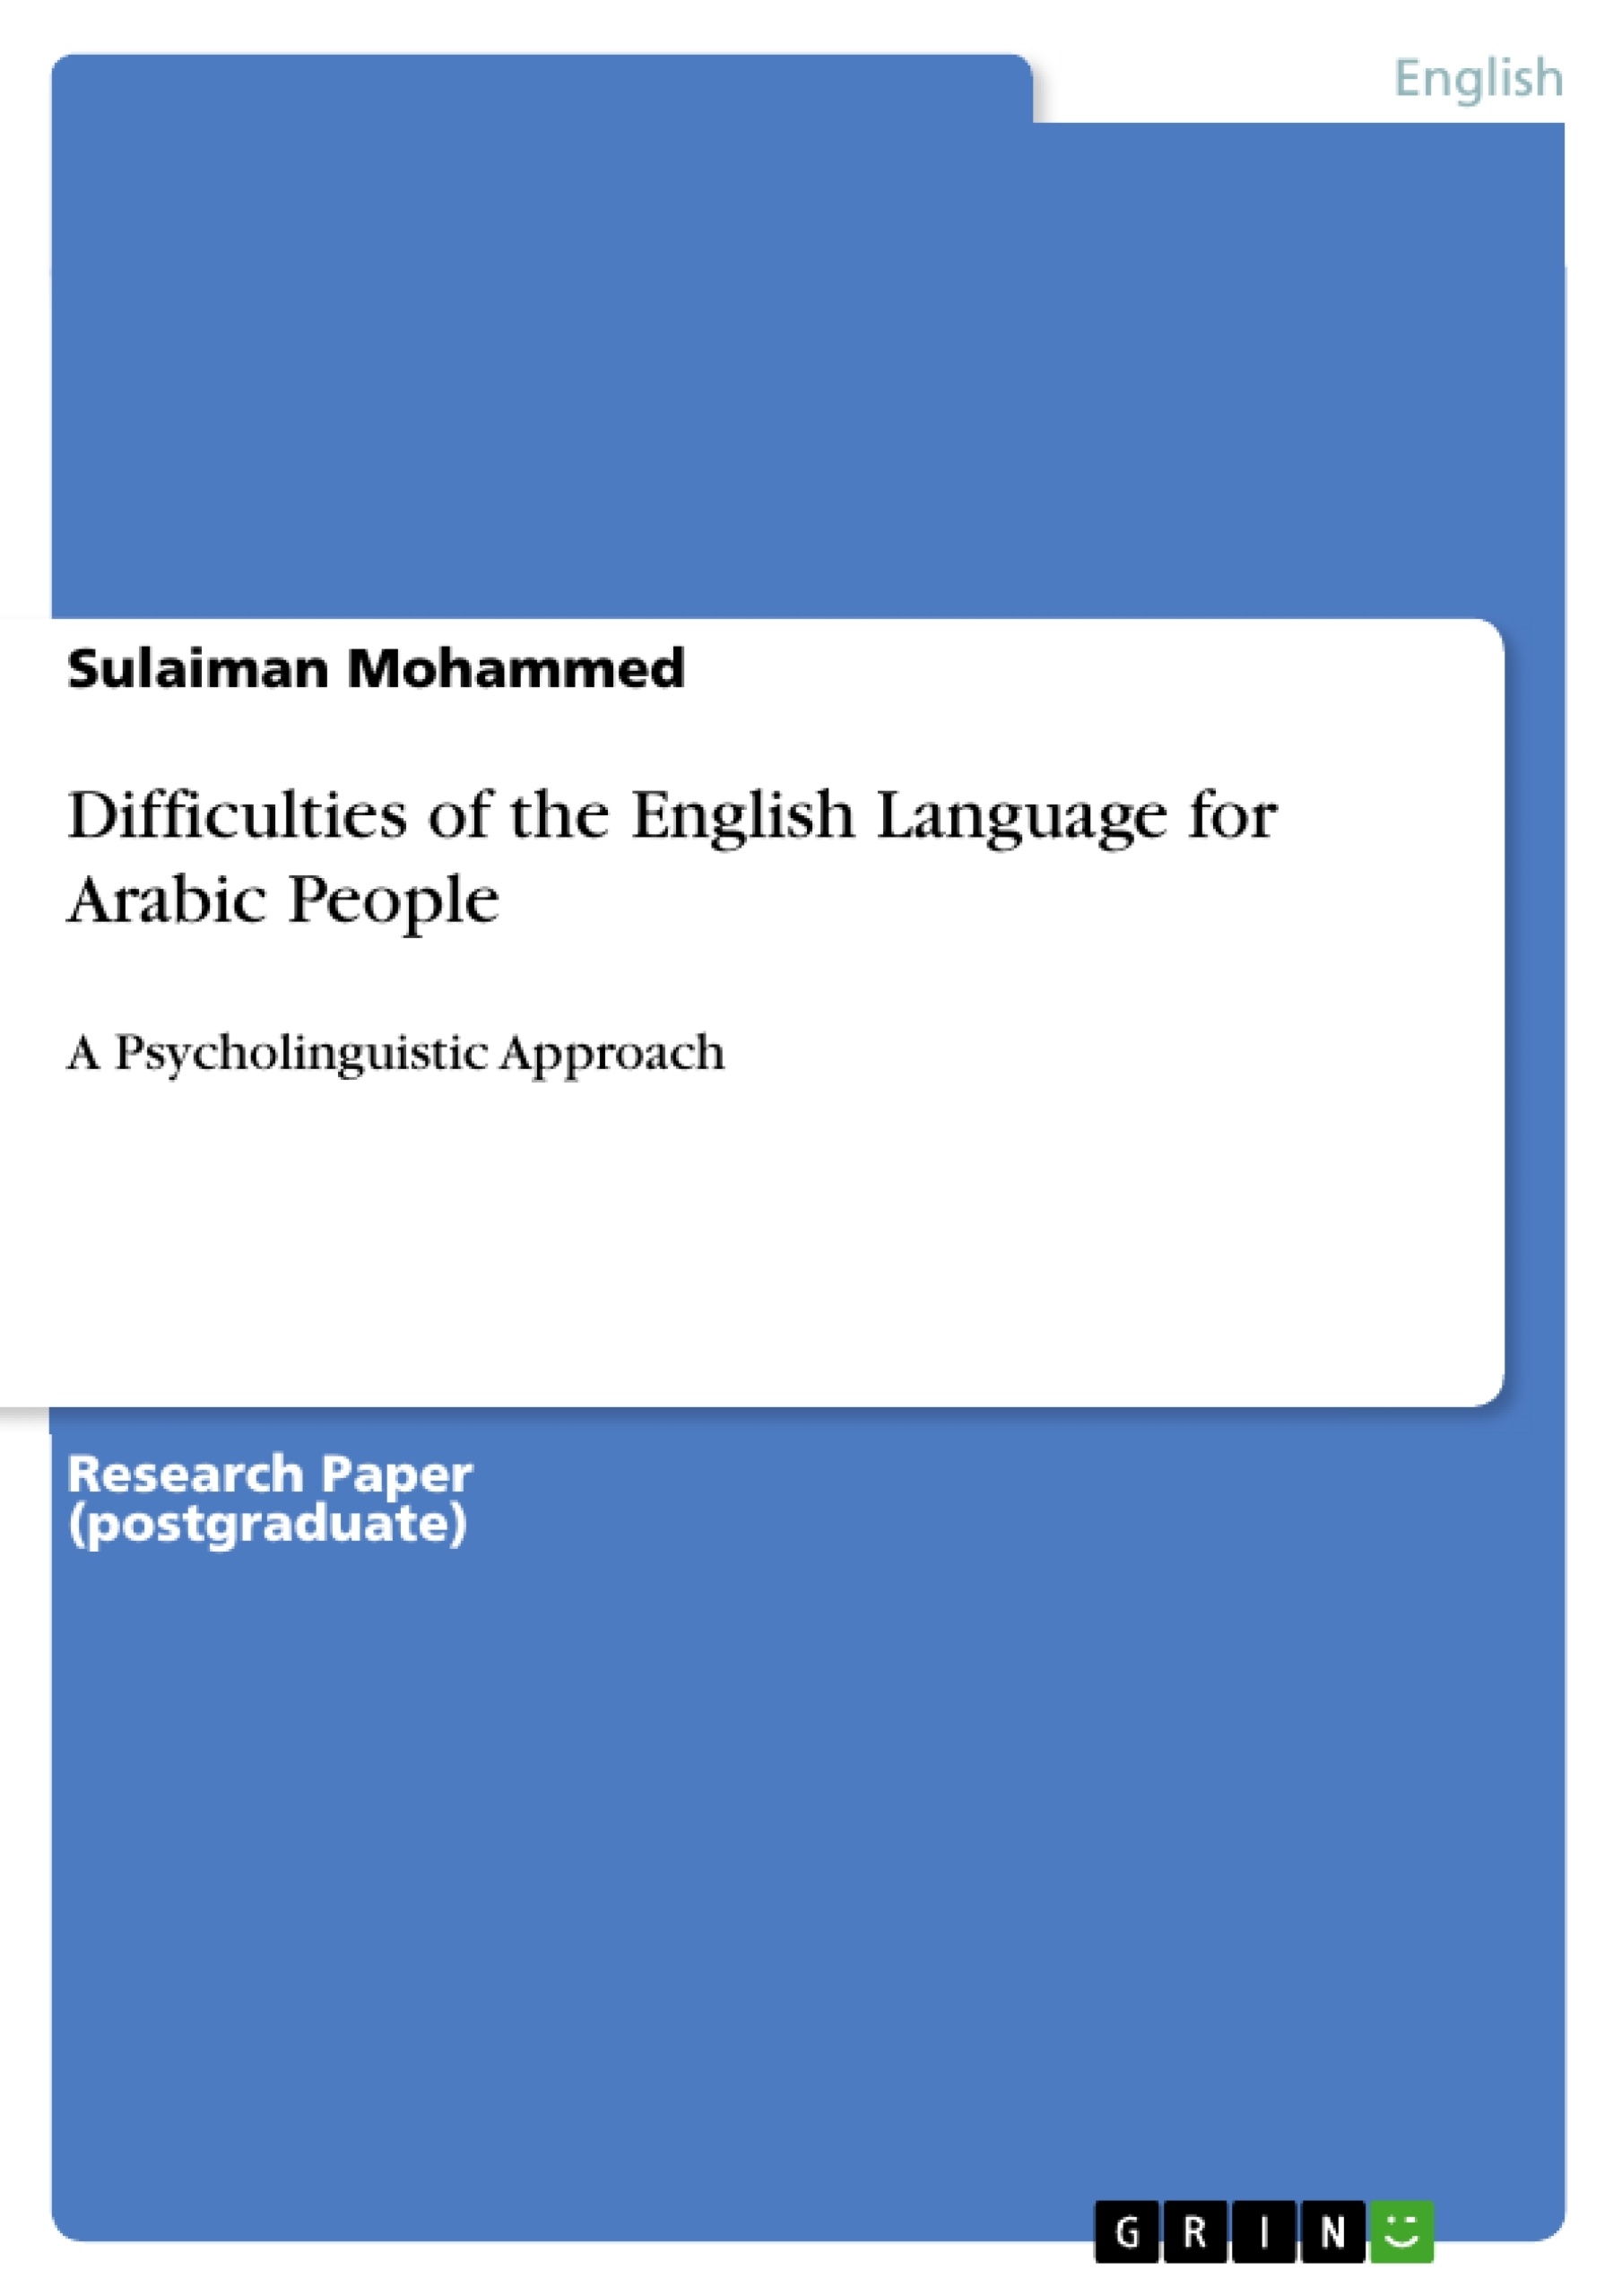 Title: Difficulties of the English Language for Arabic People